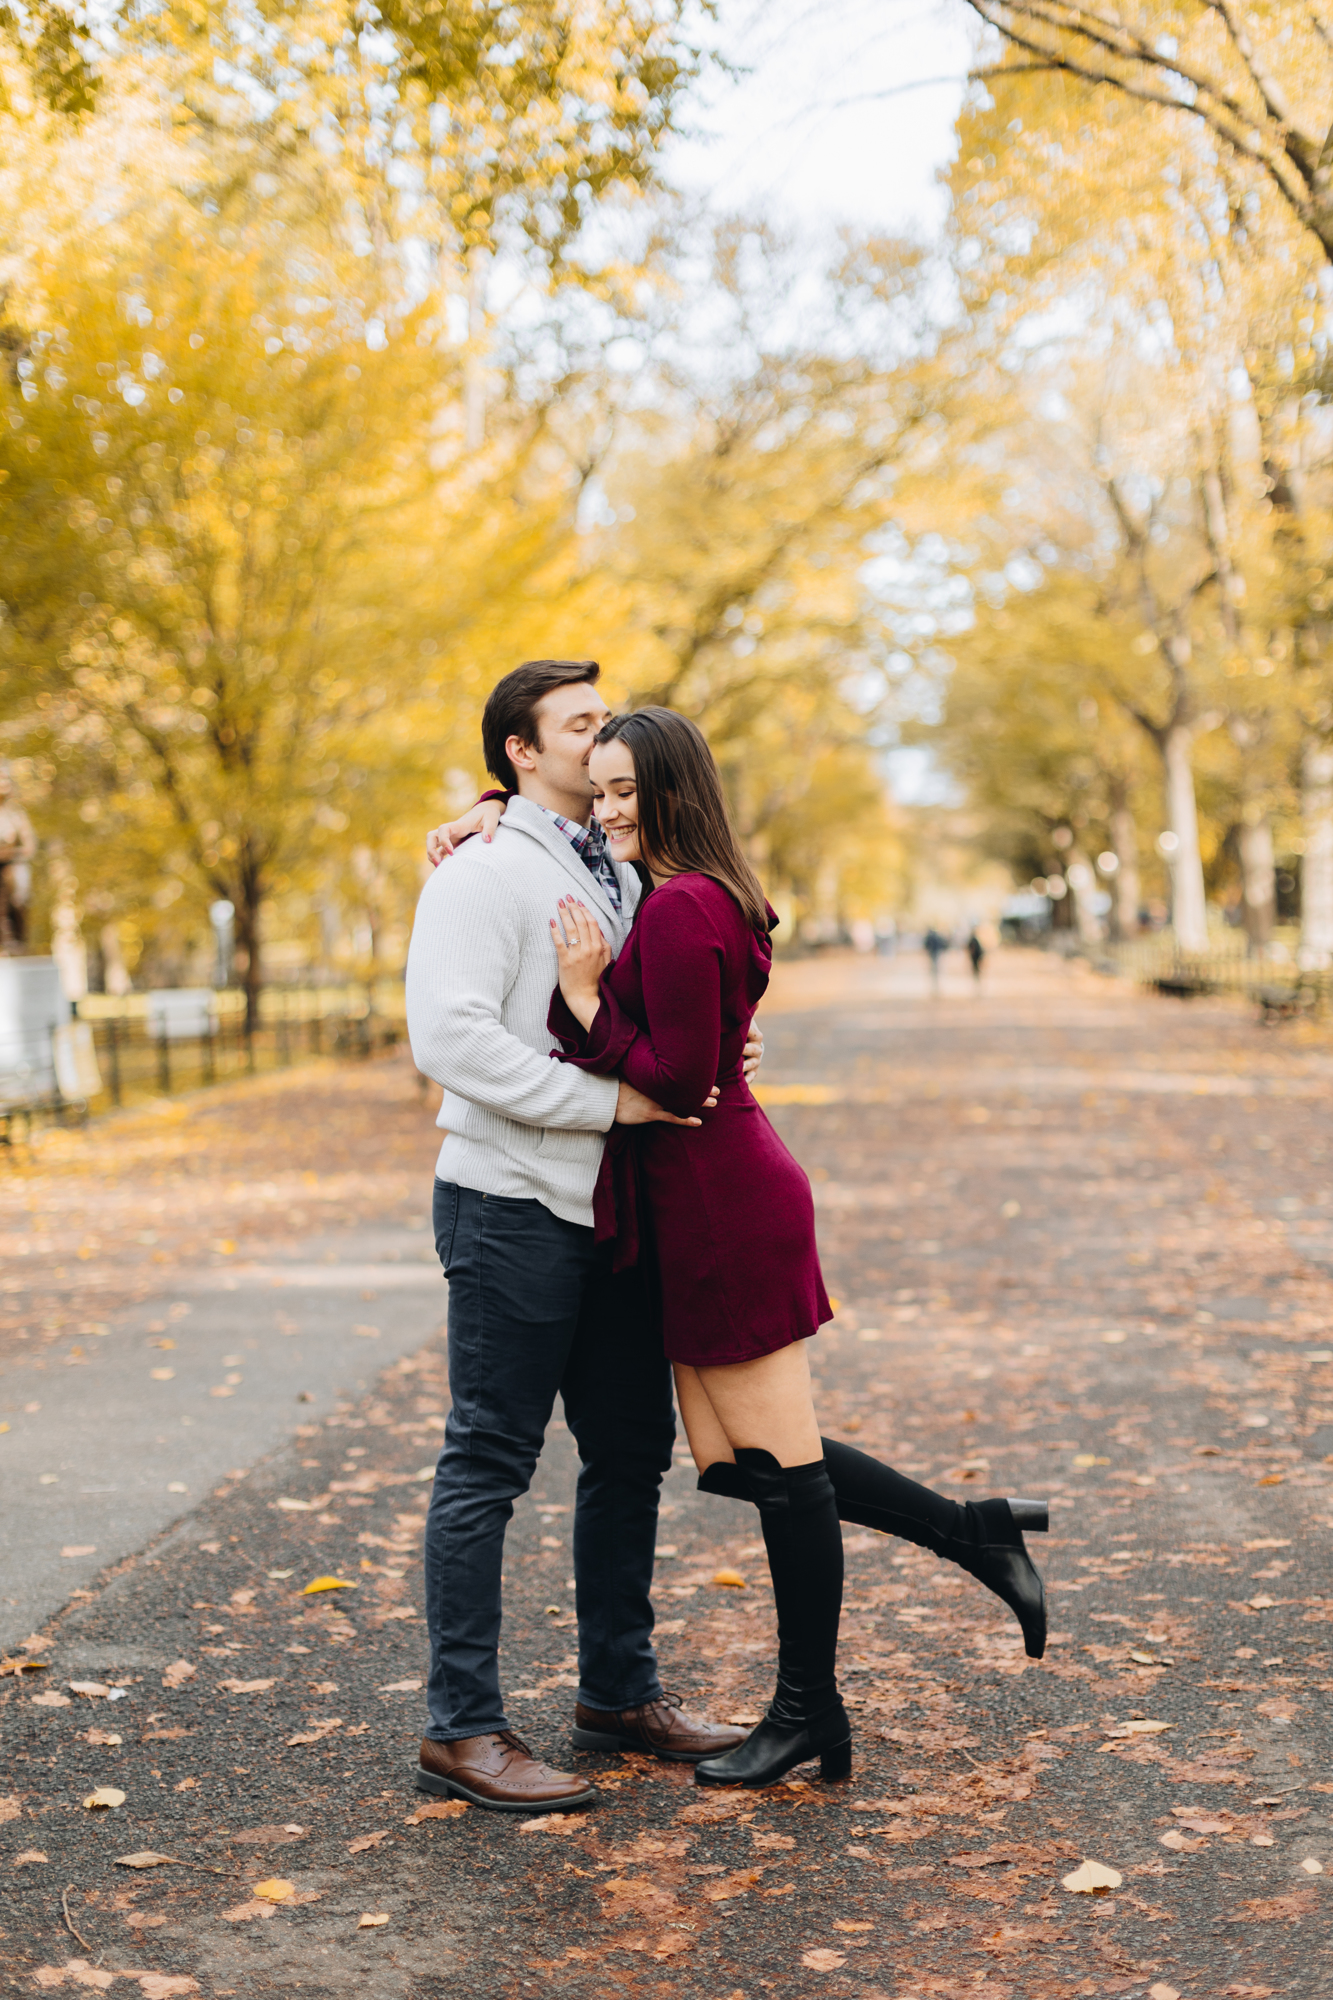 Romantic Engagement Photo Sessions in NYC